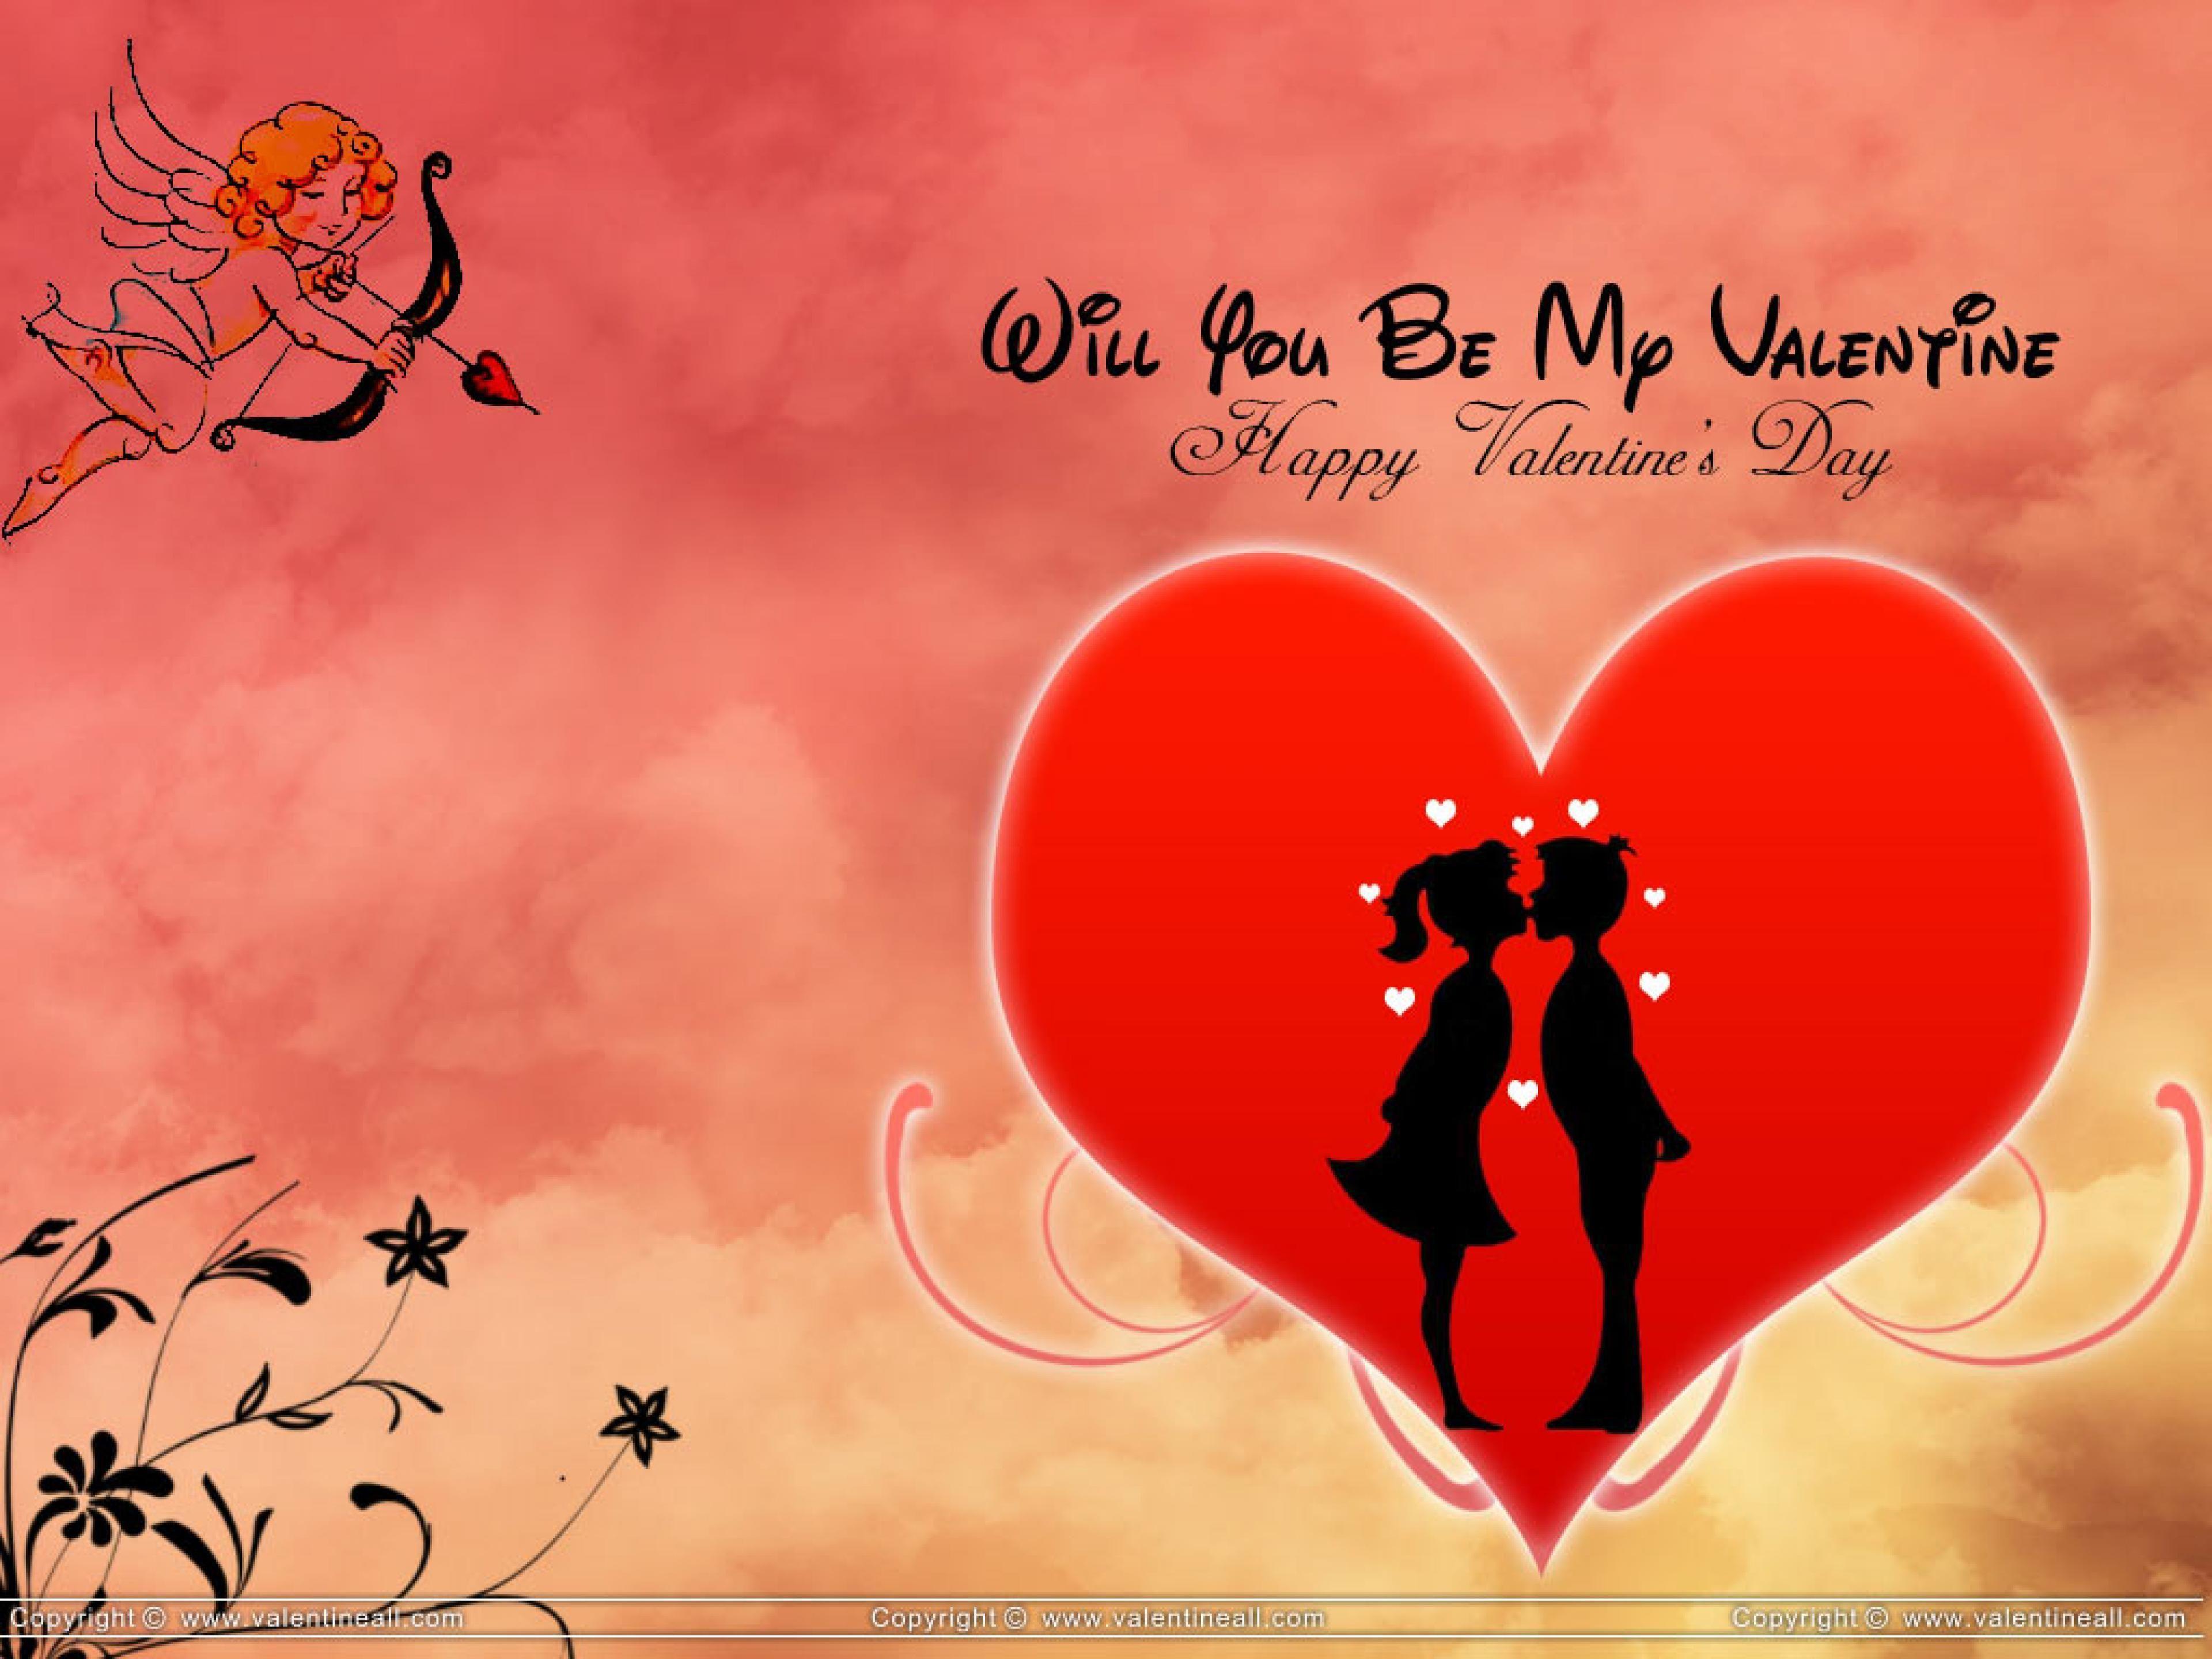 Heart Kiss Background Wallpaper You Be My Valentine. Image